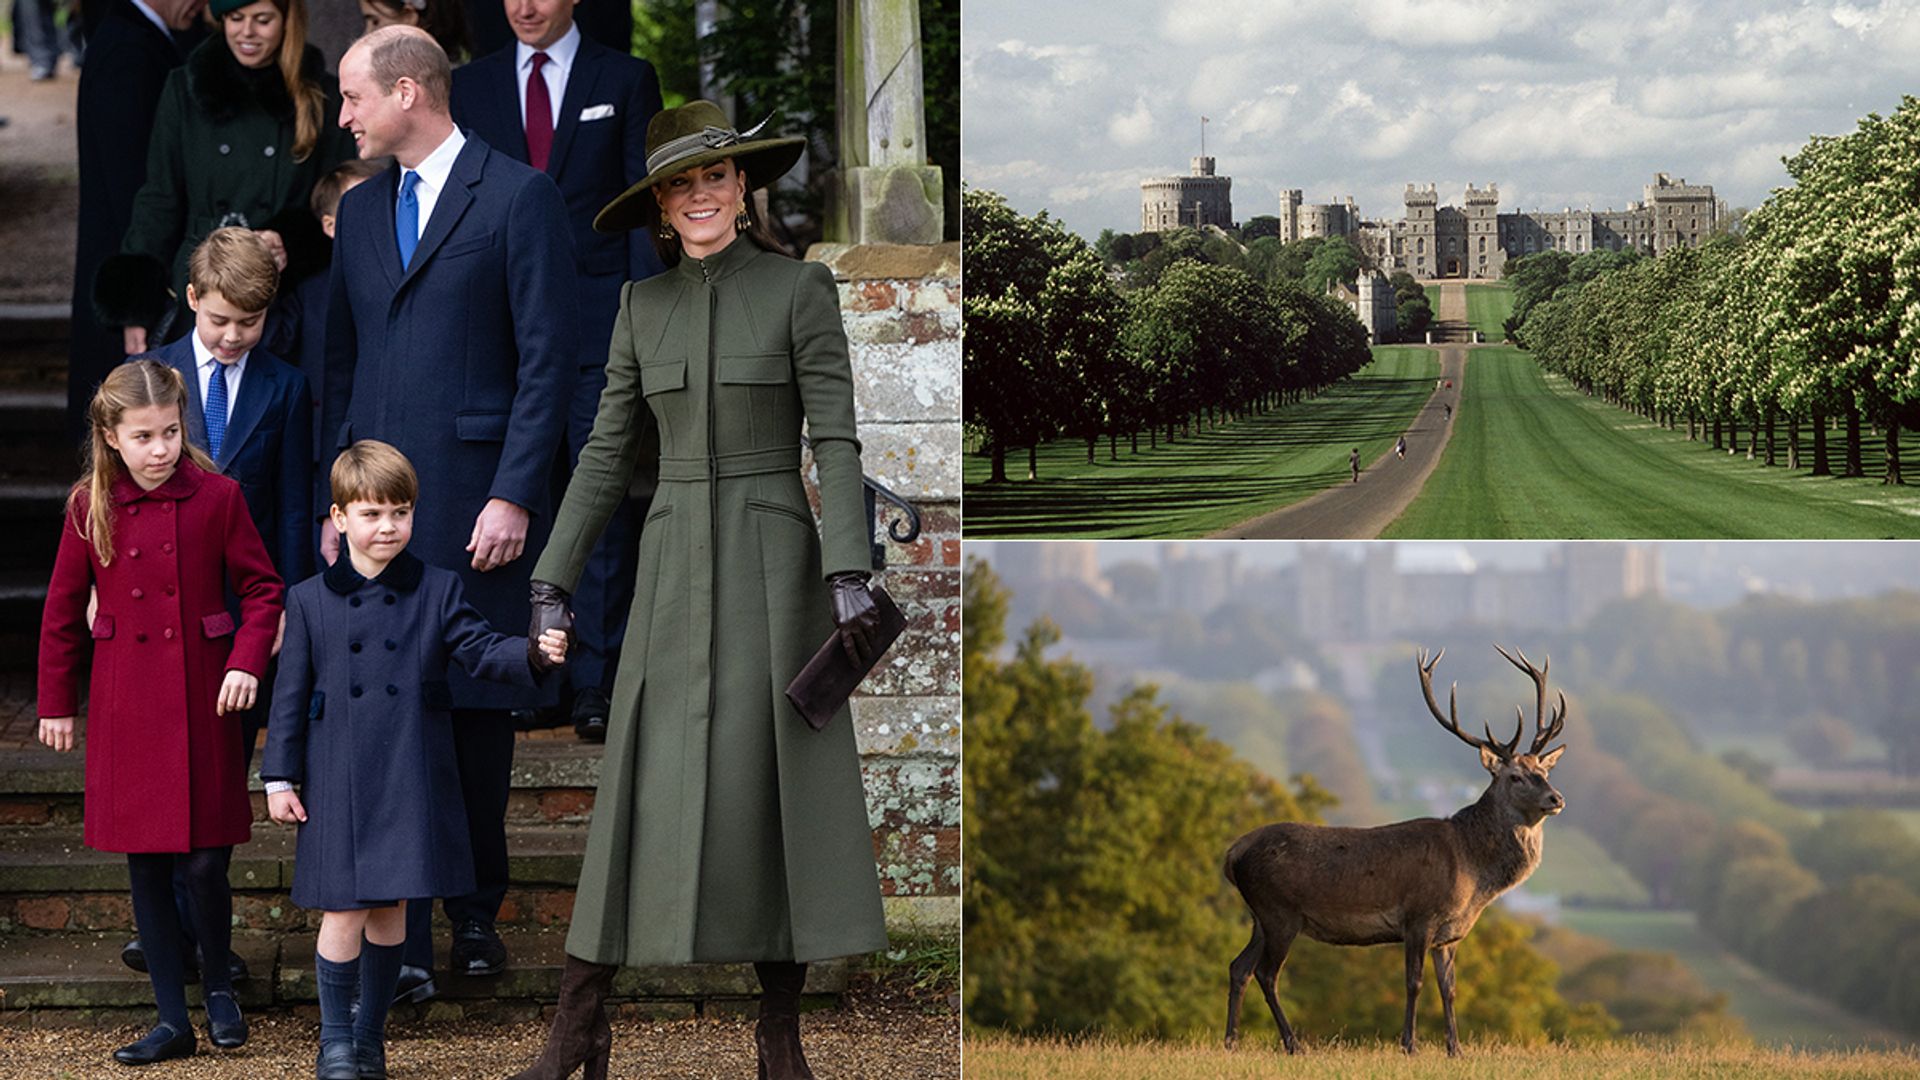 Prince William and Princess Kates favourite family hangout spots in Windsor